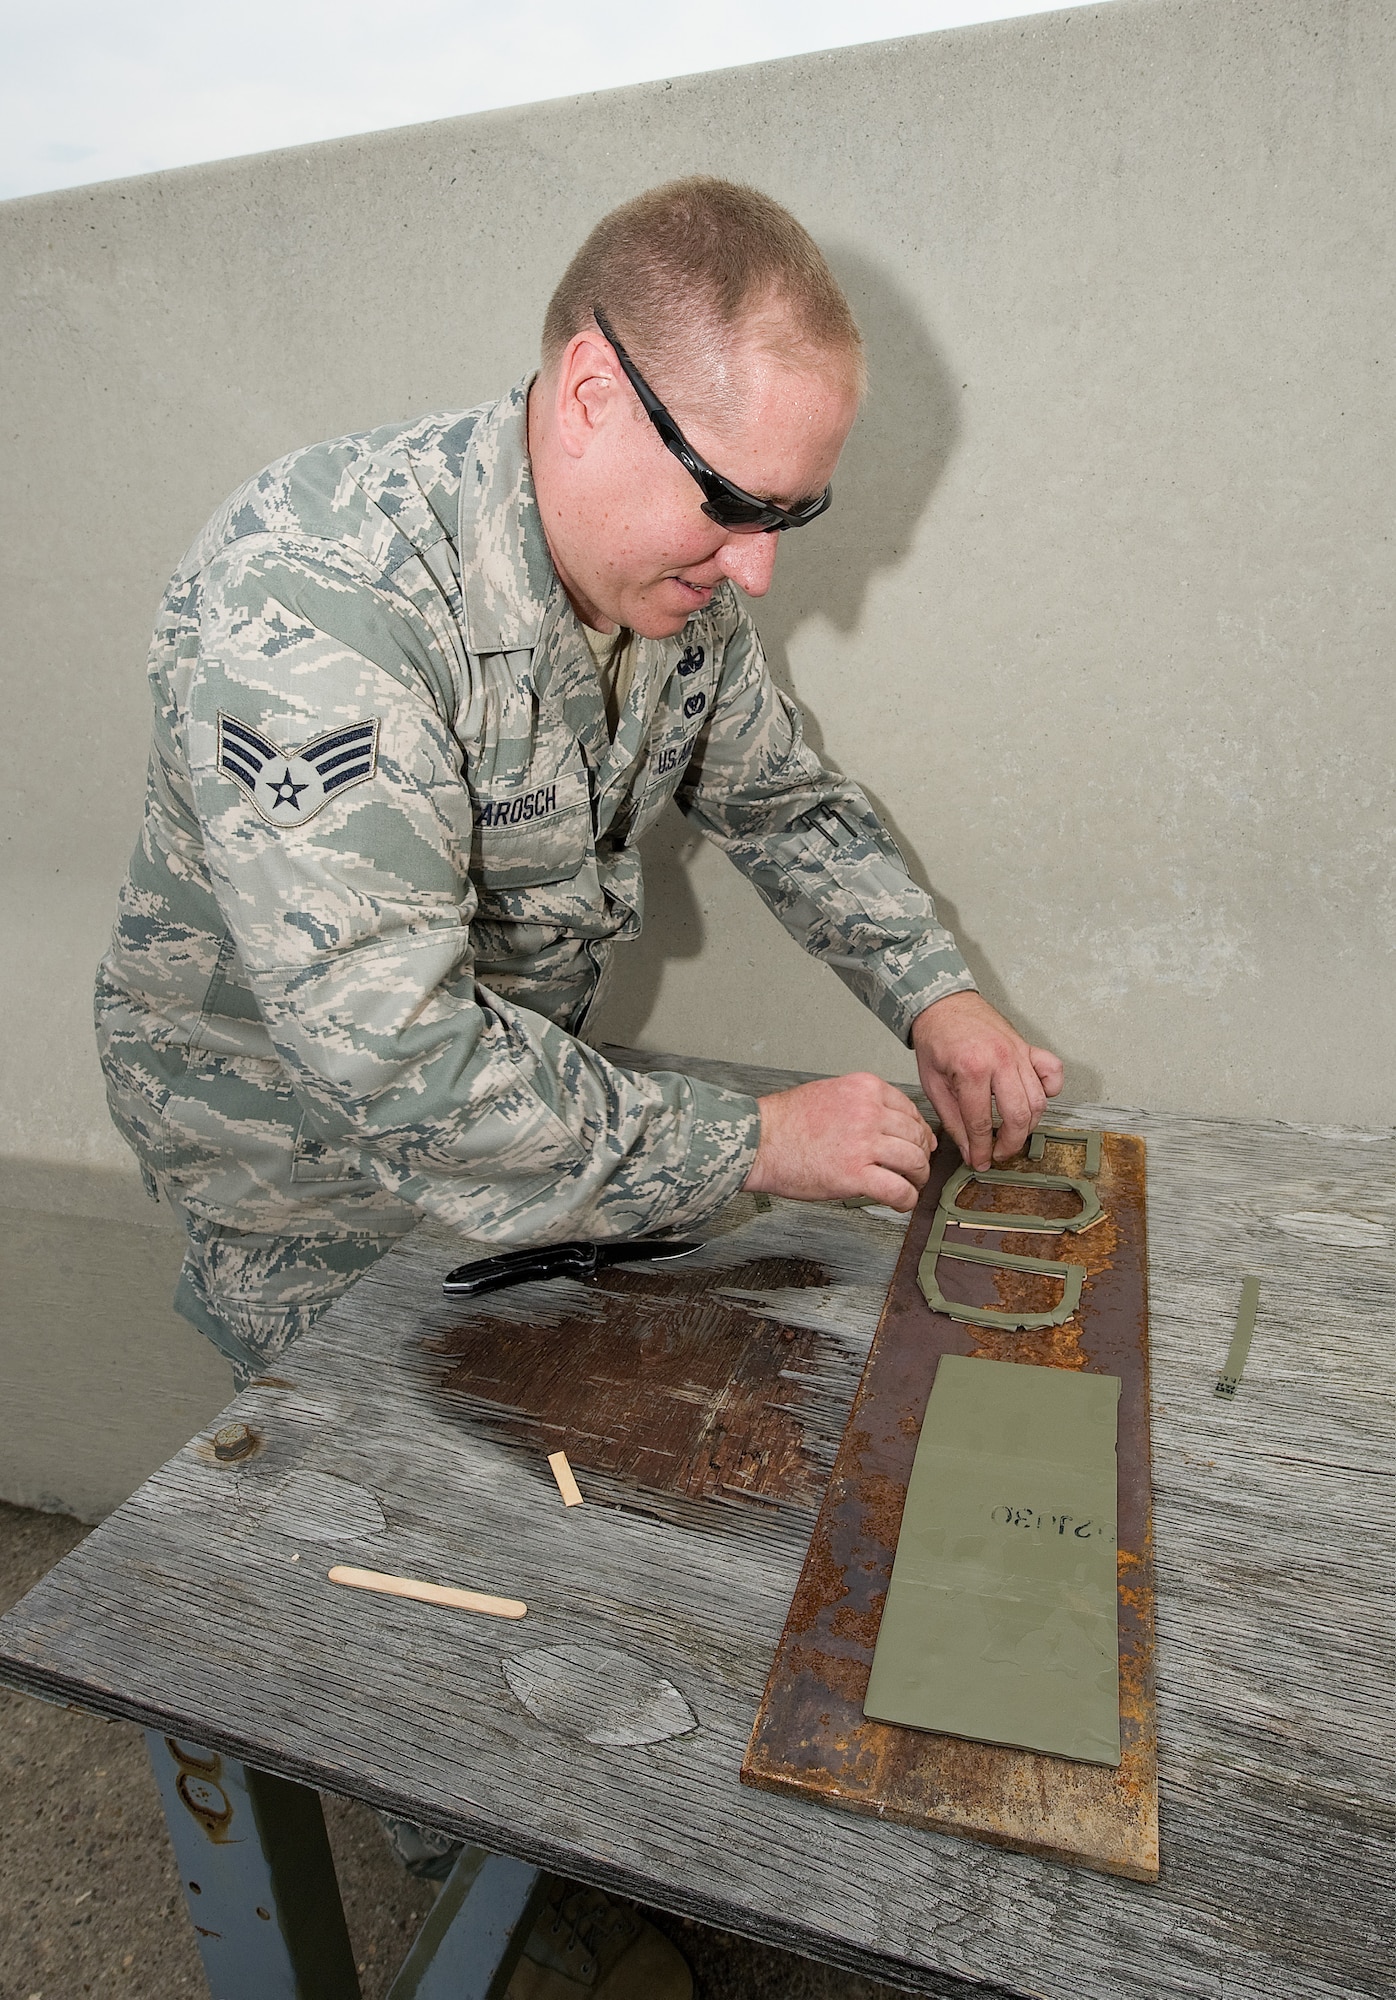 Senior Airman John Larosch, 512th Civil Engineer Squadron Explosive Ordnance Disposal Flight technician, prepares deta sheet to test how much it will penetrate a steel plate after detonation at the EOD demolition range here, July 29. Airman Larosch is one of seven reservists assigned to the 512th EOD Flight. (U.S. Air Force photo/Jason Minto)